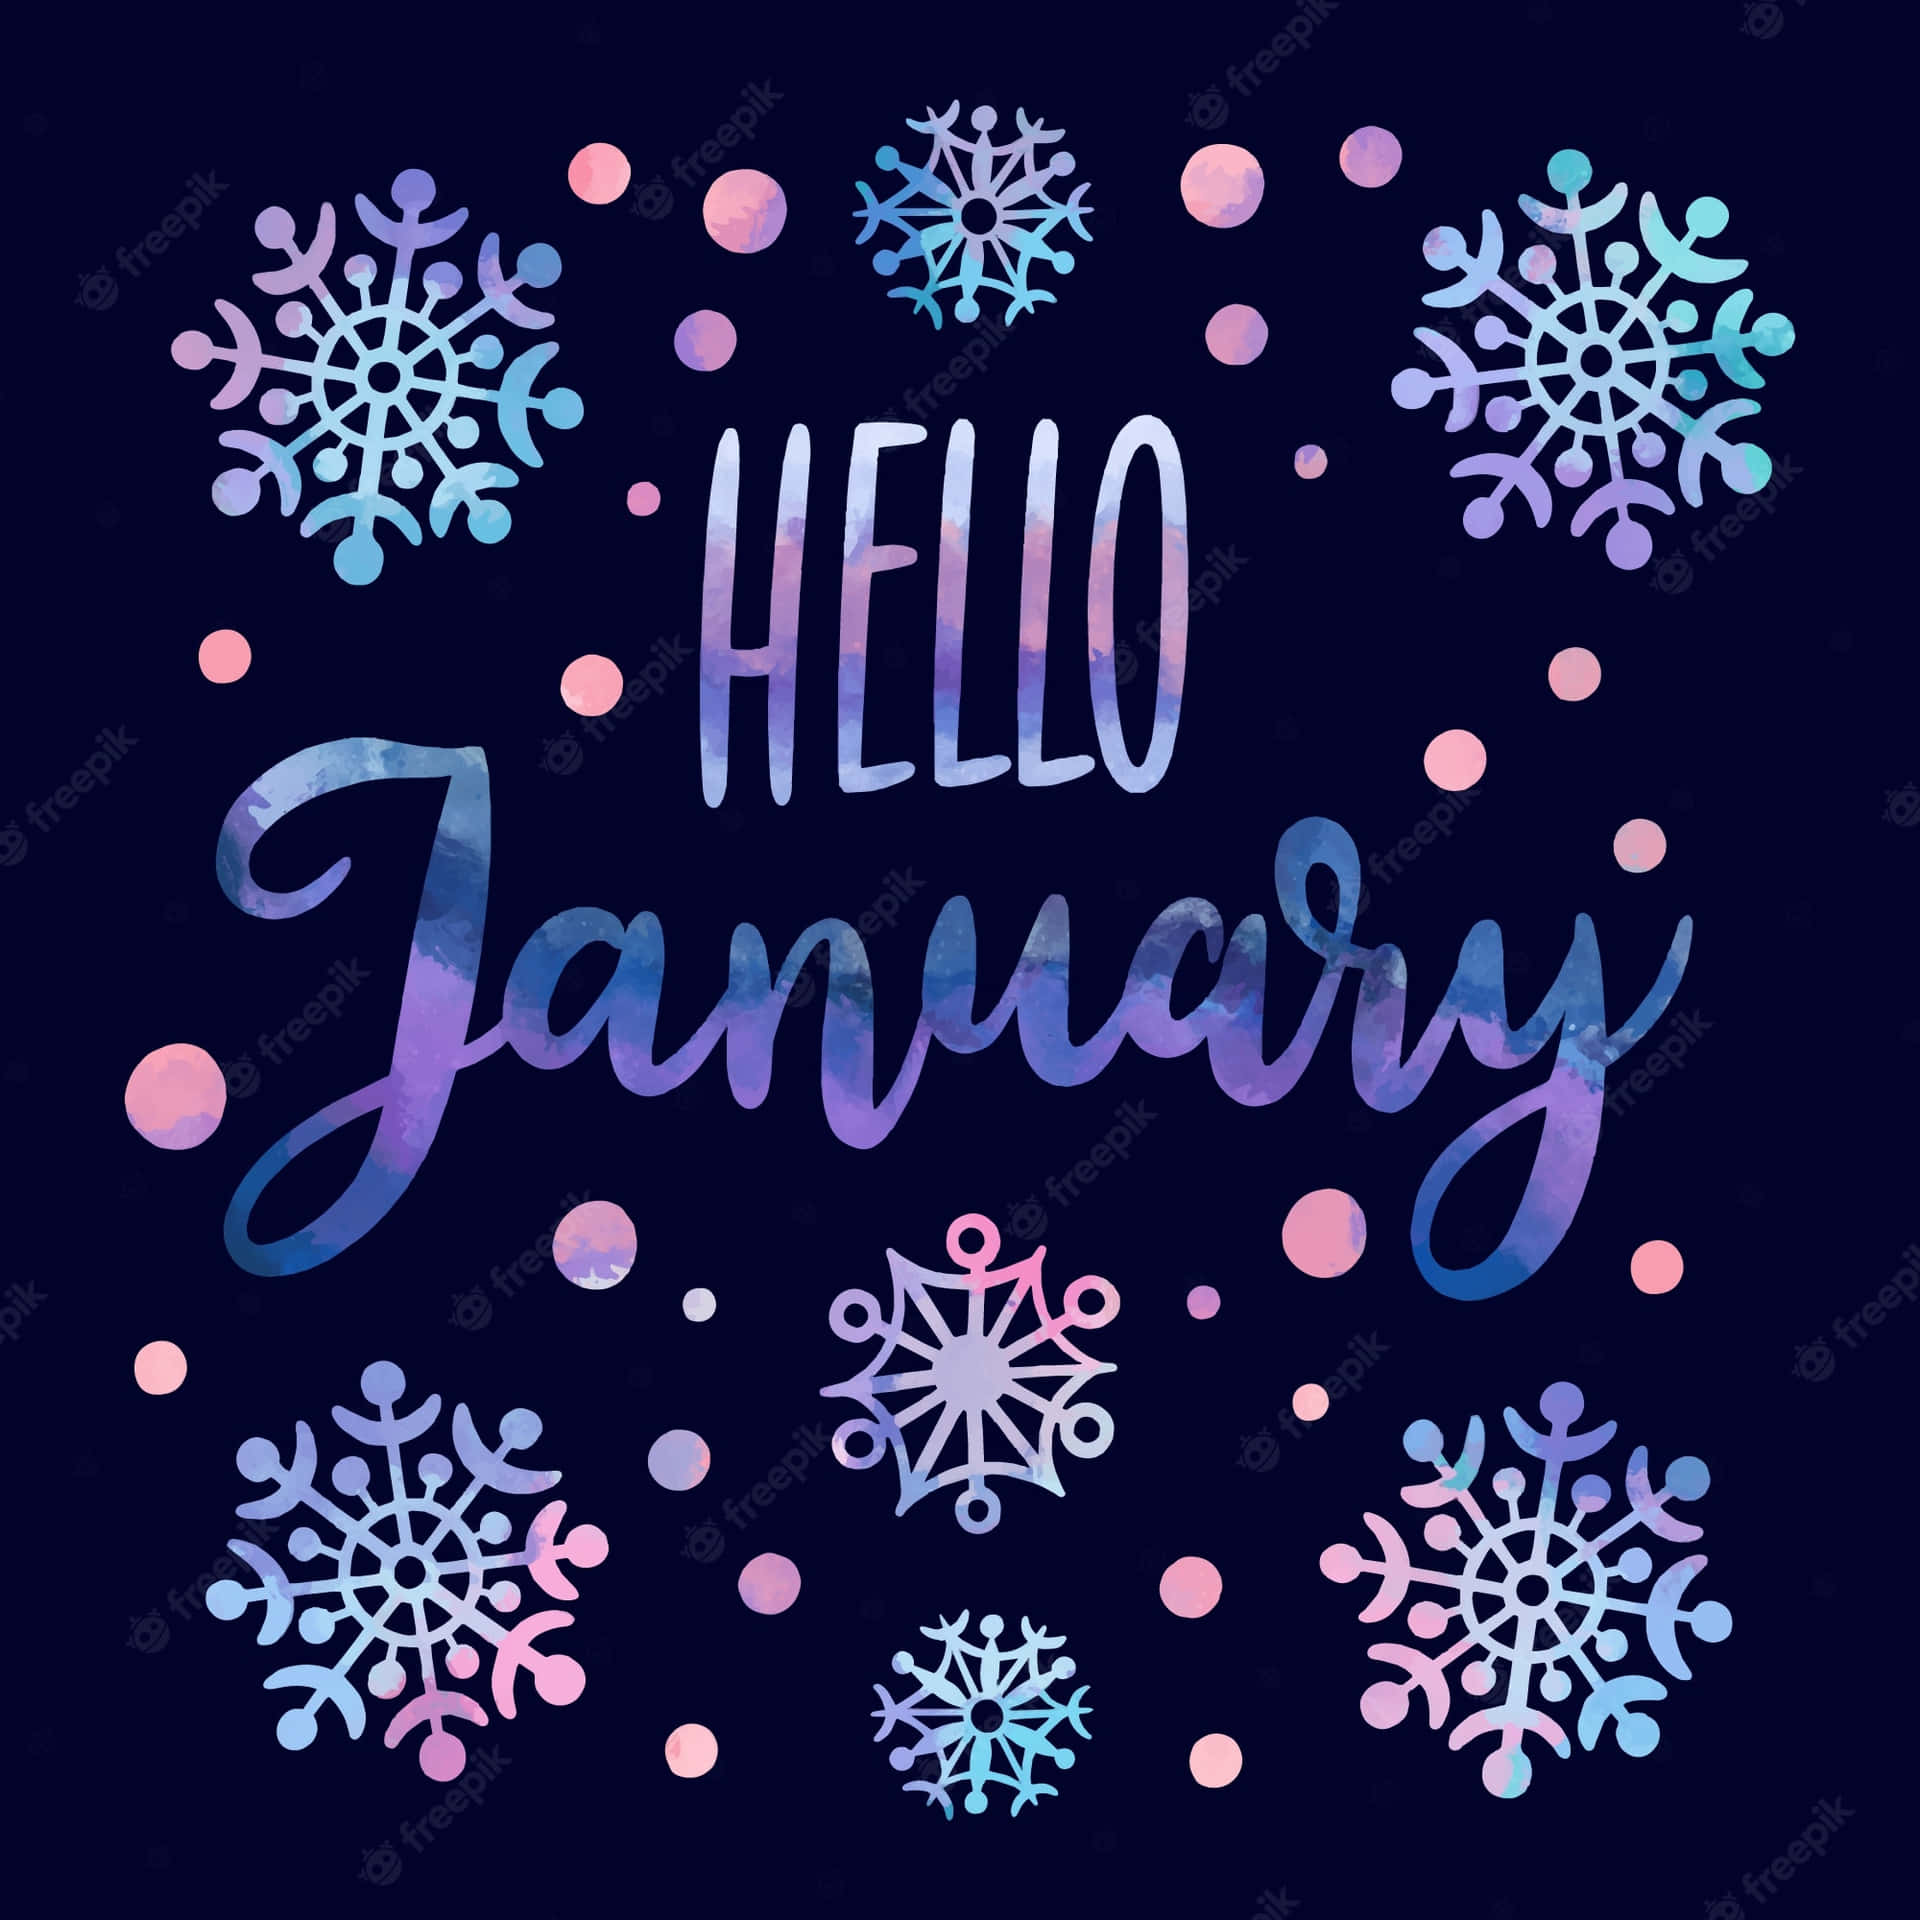 Hello January Handwritten Lettering On A Dark Background With Snowflakes Wallpaper